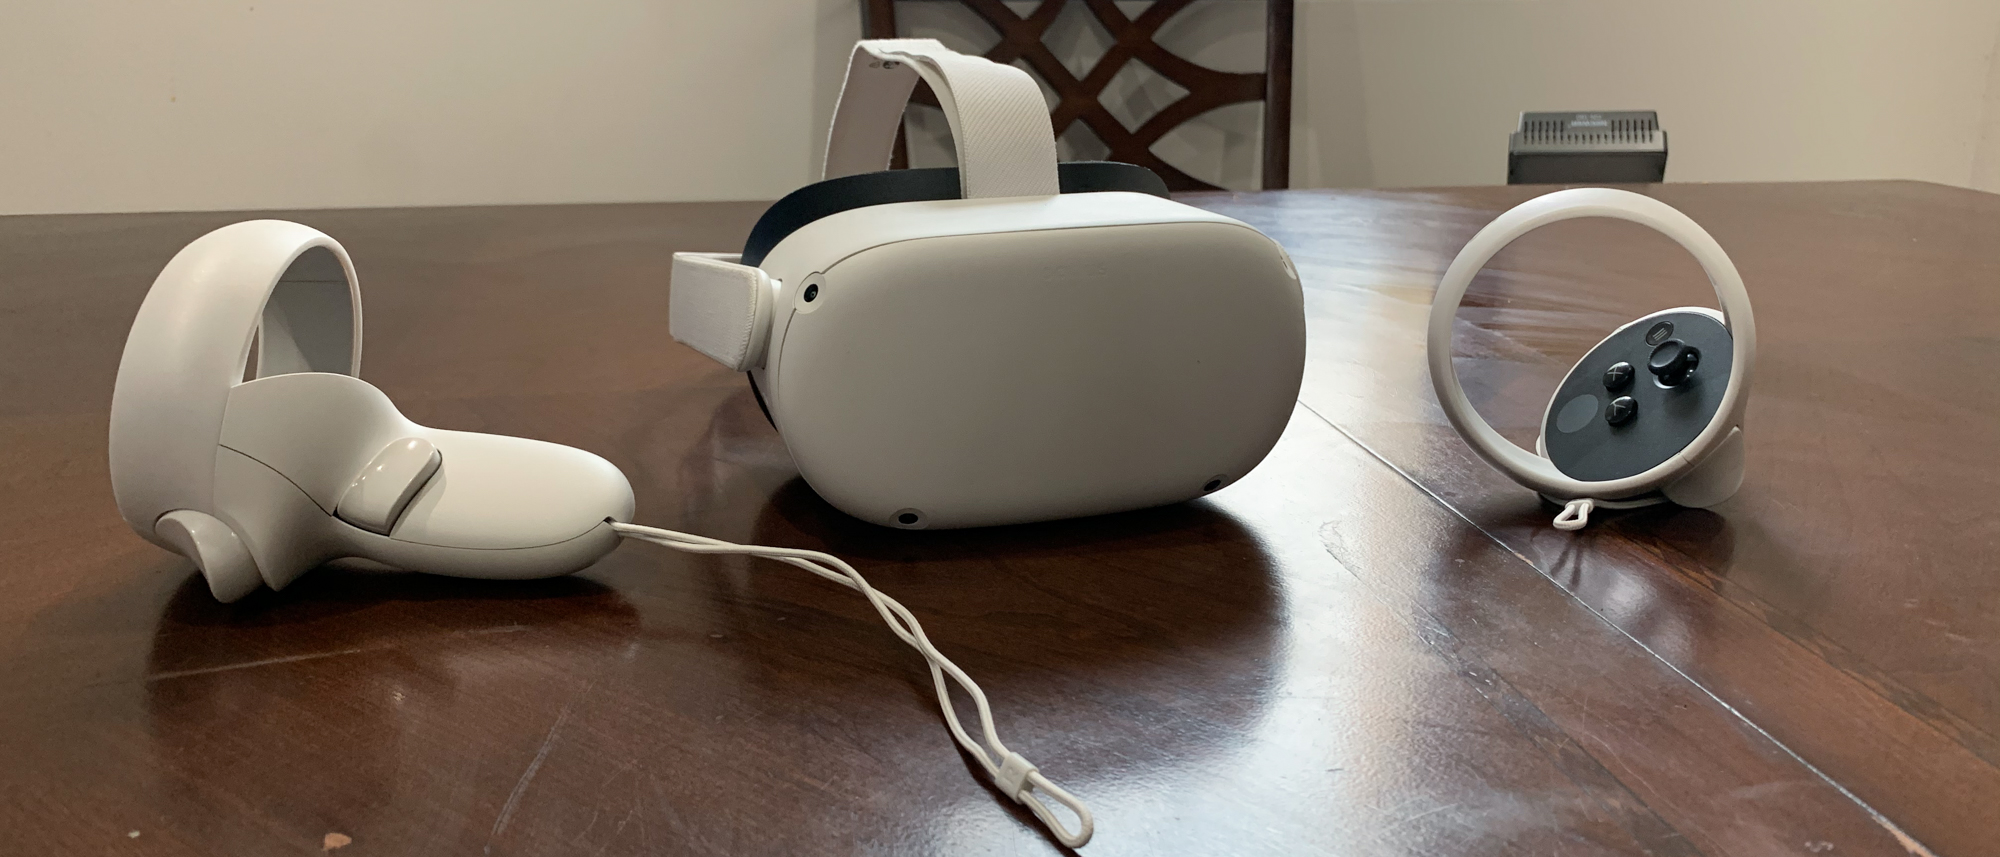 Meta Quest 2 review: The VR headset we've been waiting for | Laptop Mag